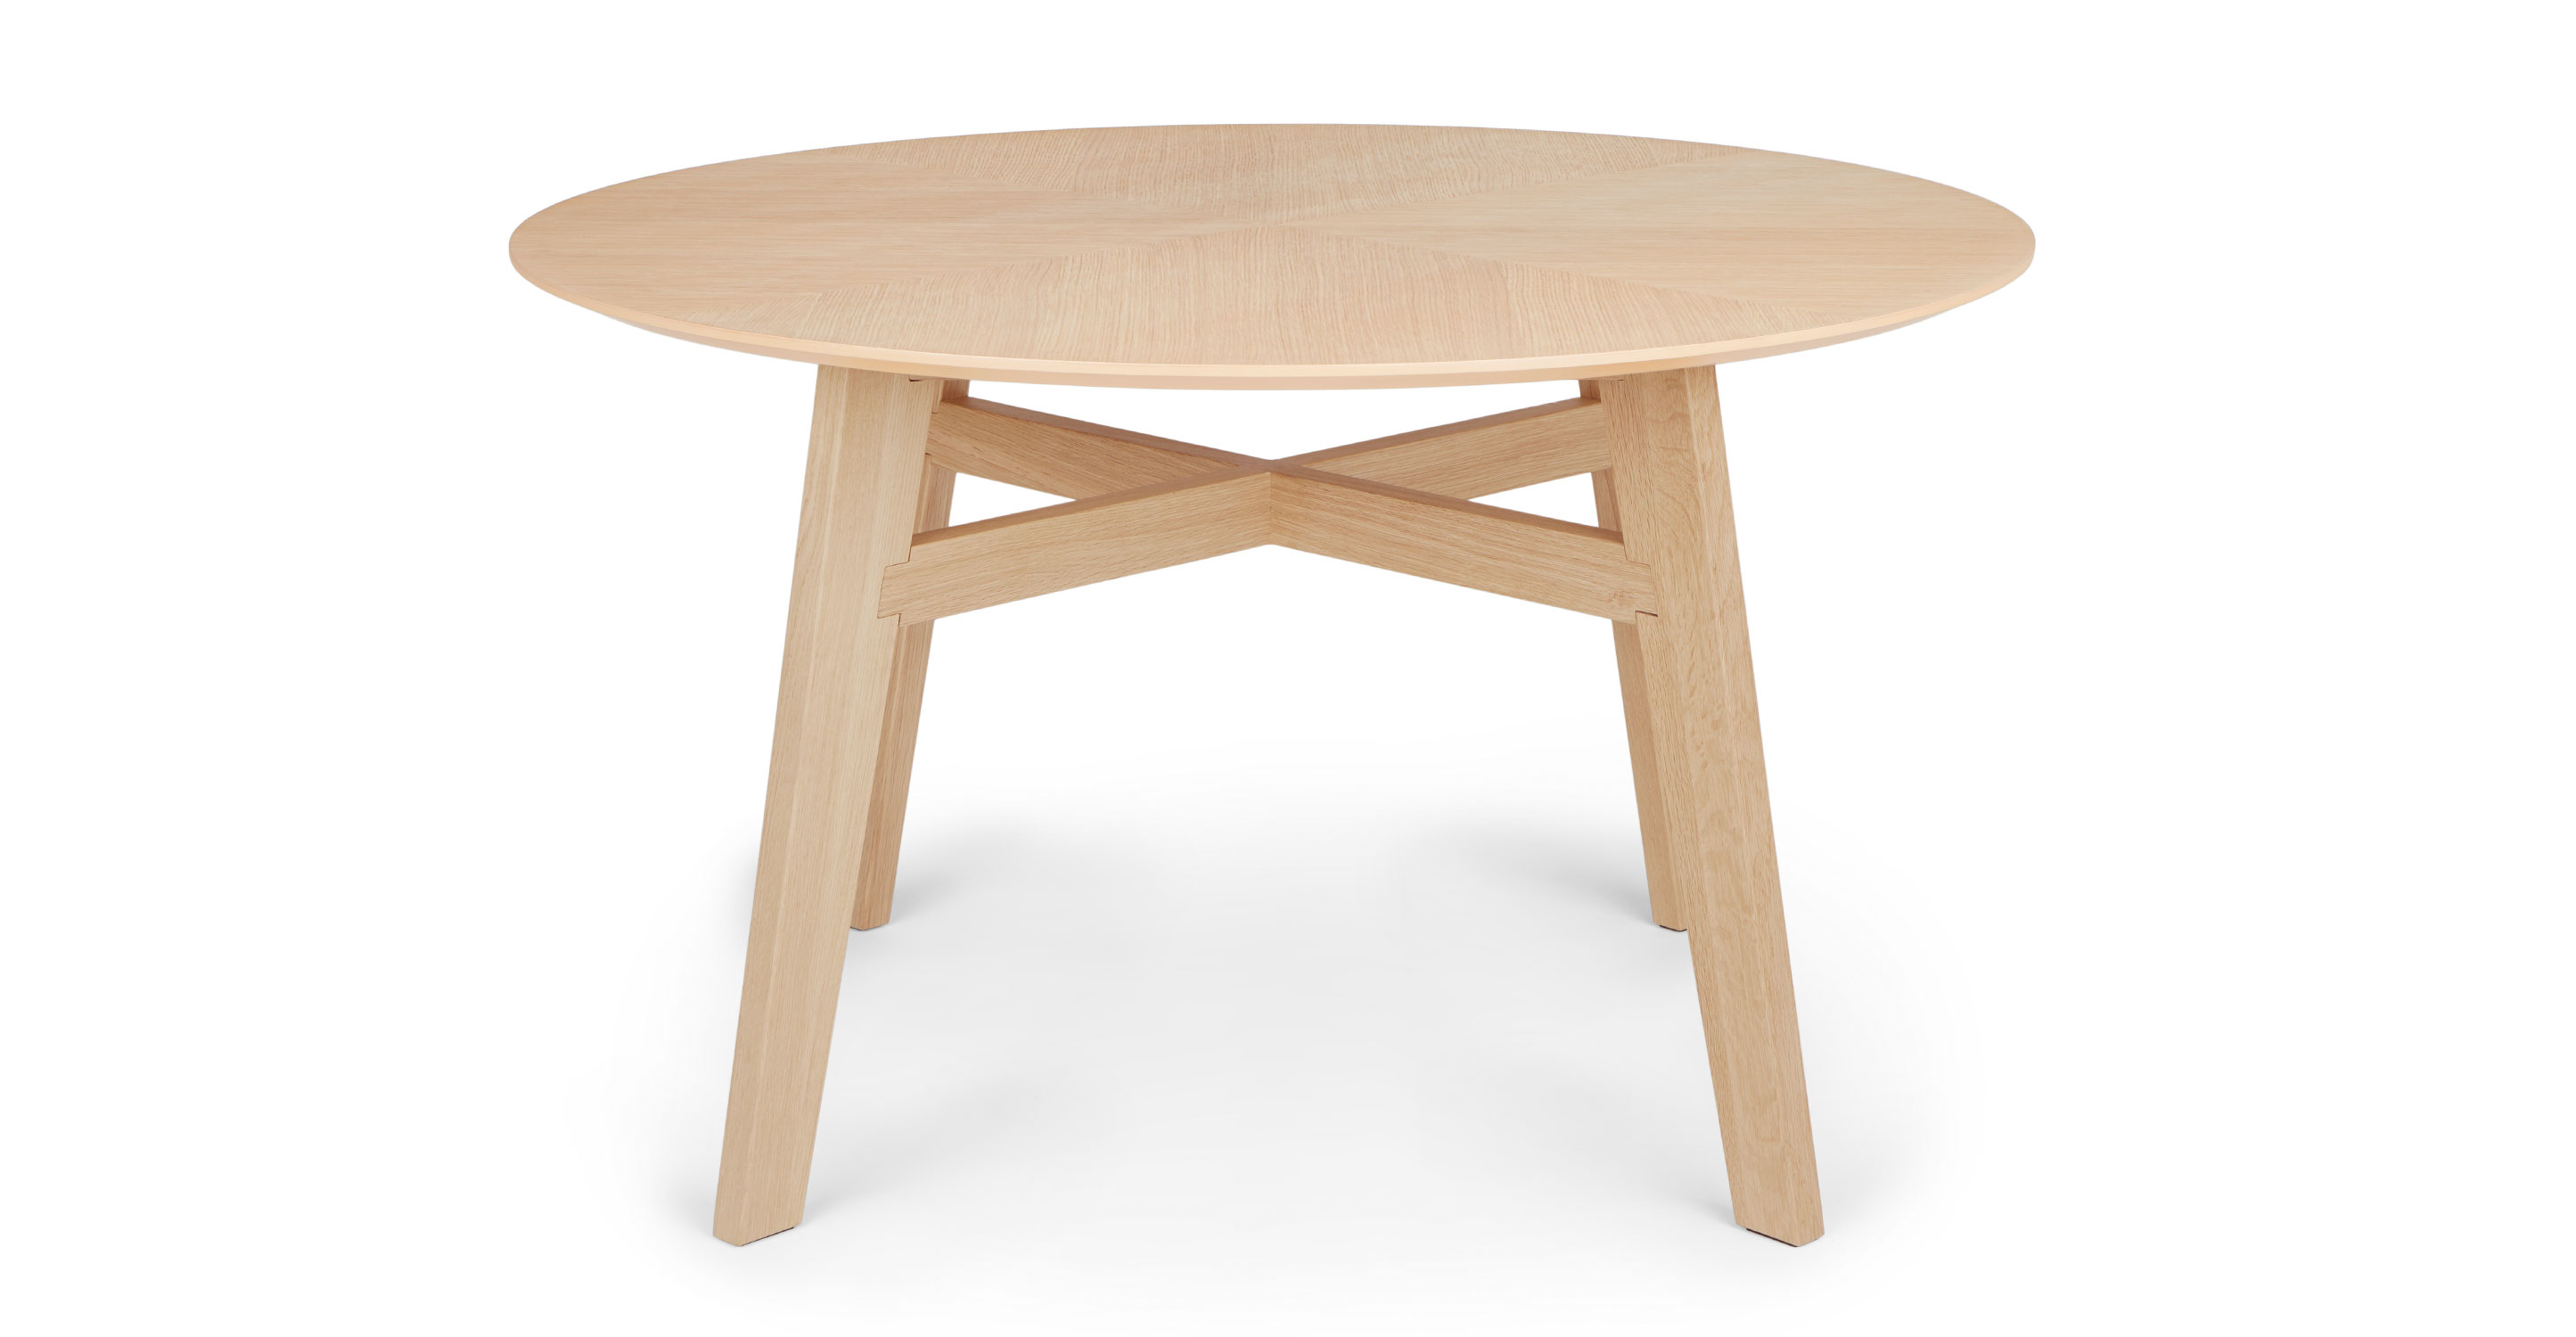 Round Light Oak Dining Table For 4, Light Oak Round Dining Table And Chairs